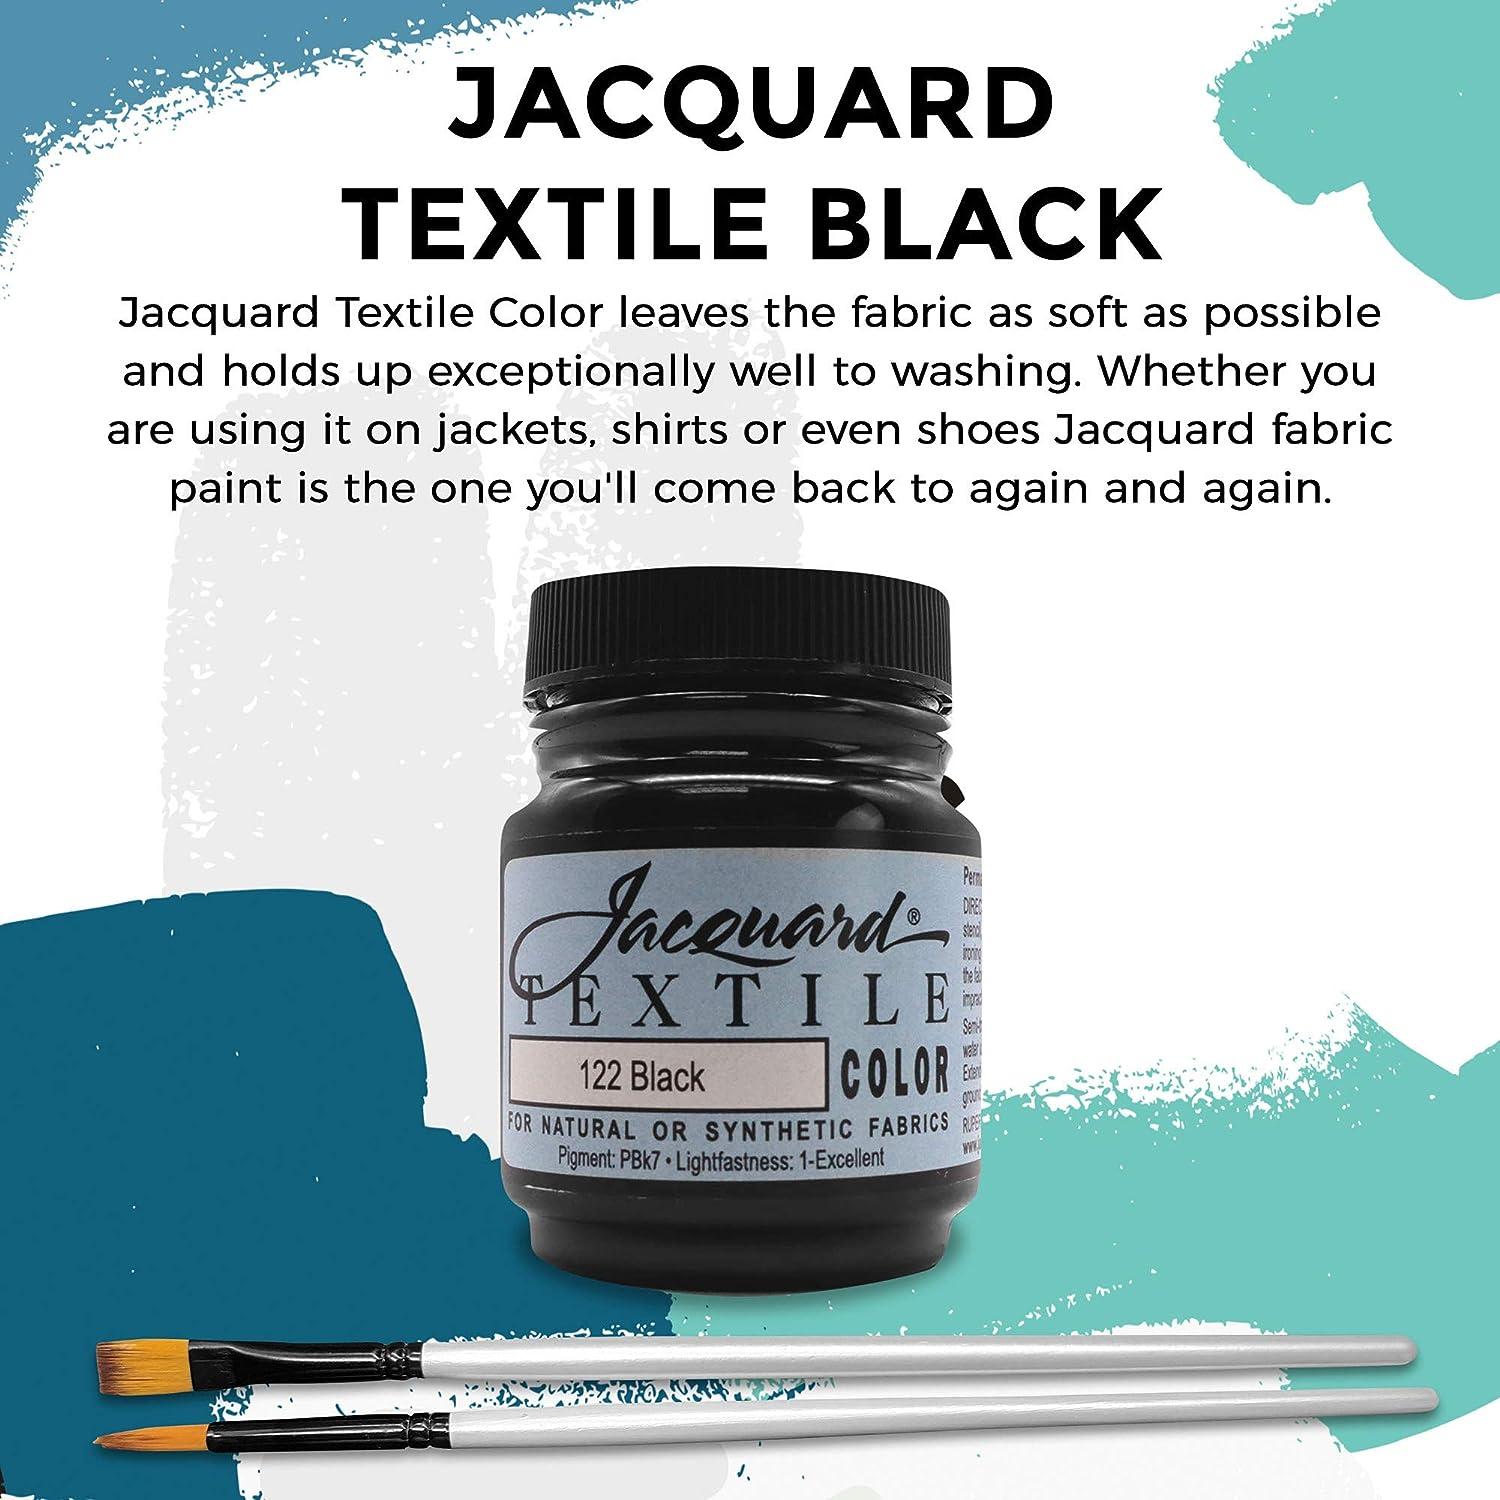 Moshify Jacquard Products Black Textile Color - Fabric Paint Made